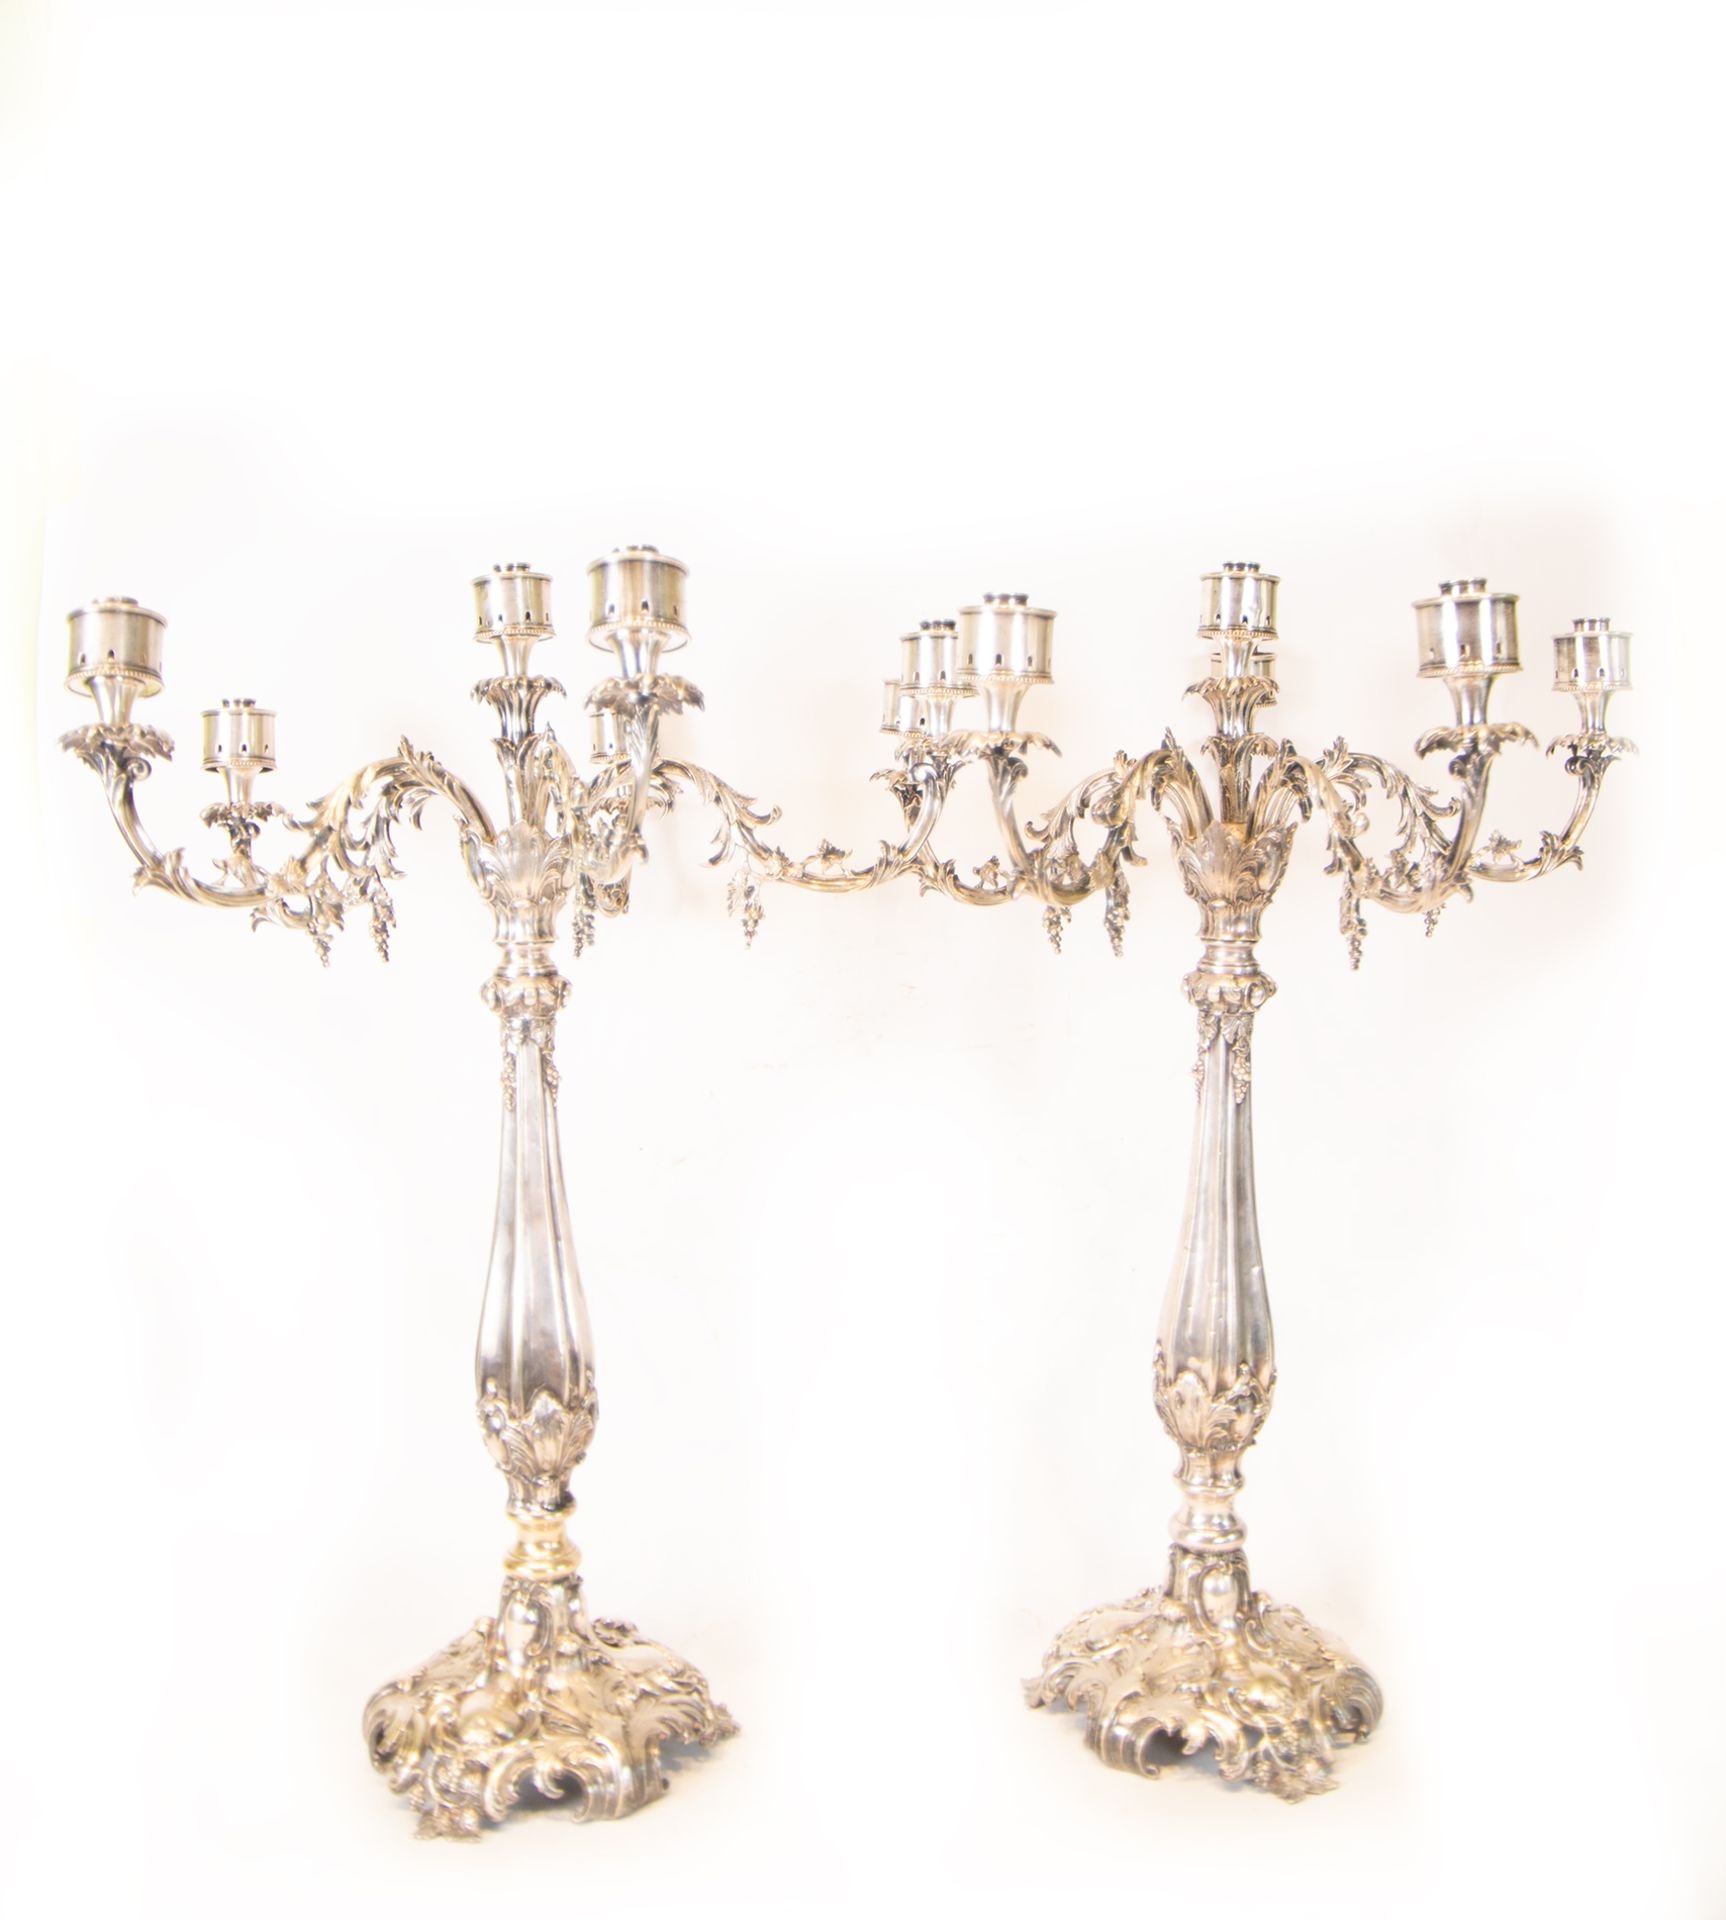 Large Pair of Victorian-style Silver-Gilt Candelabra, 19th century